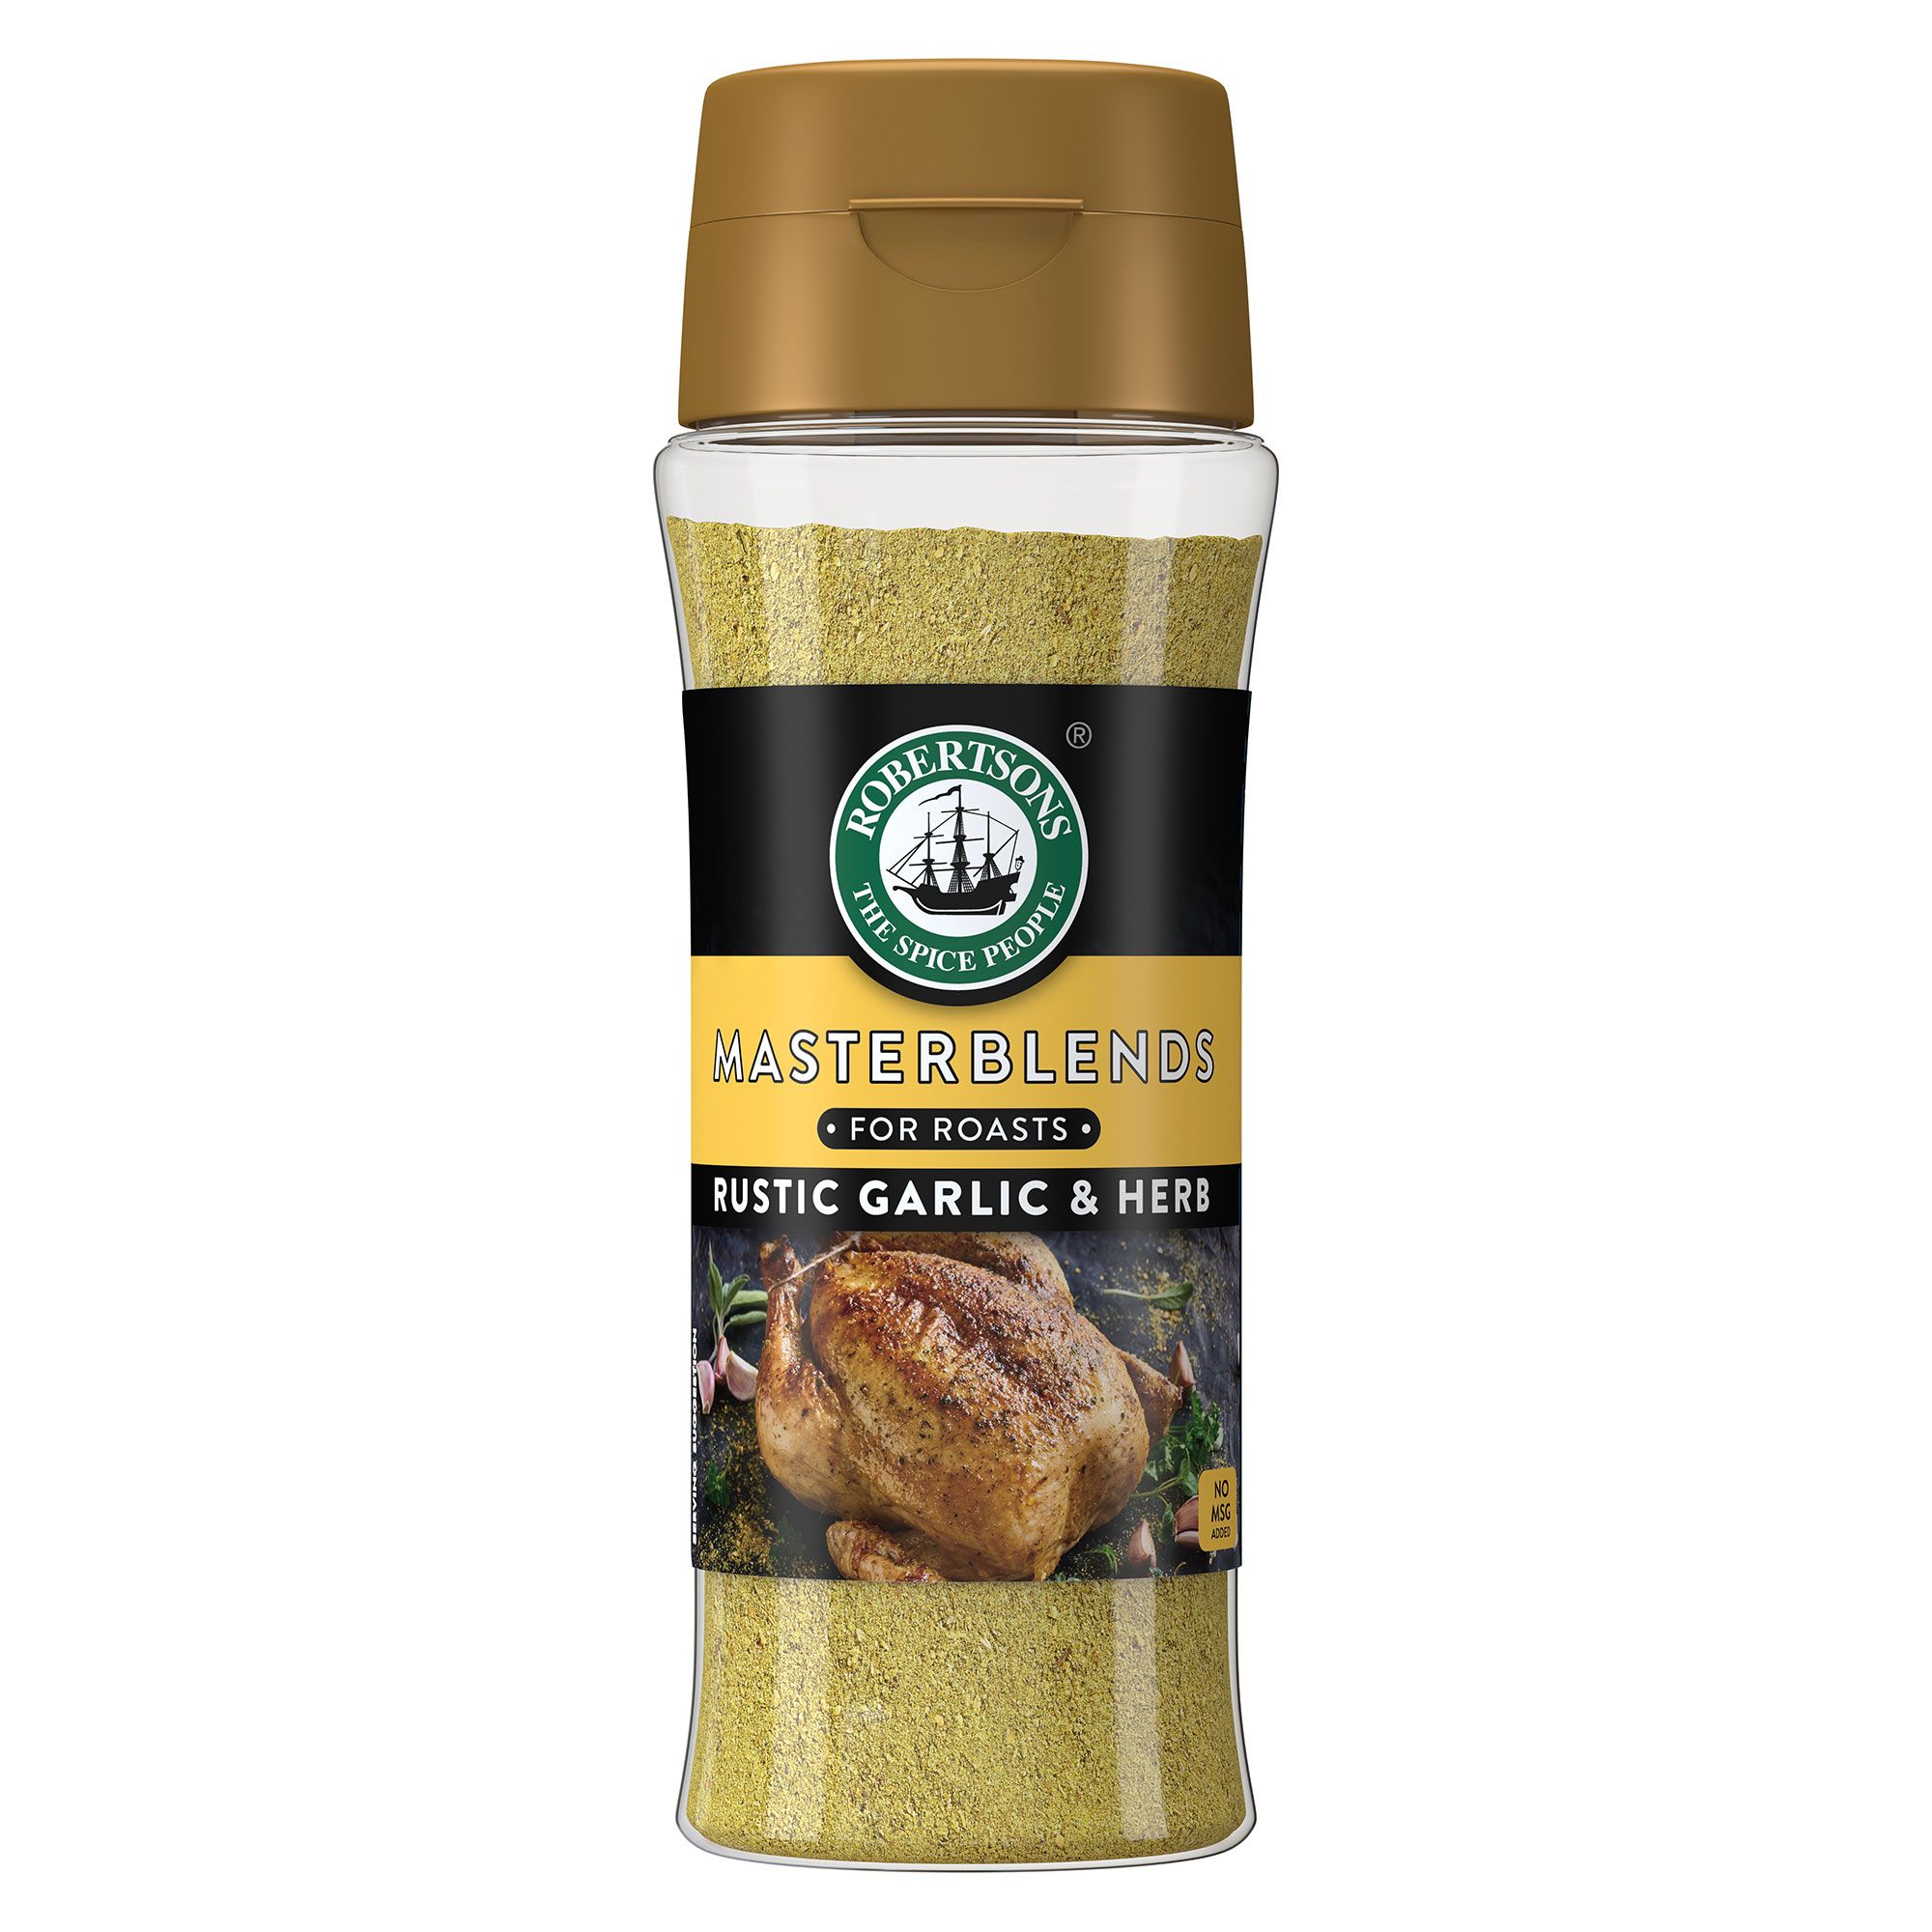 Robertsons Masterblends Rustic Garlic and Herb